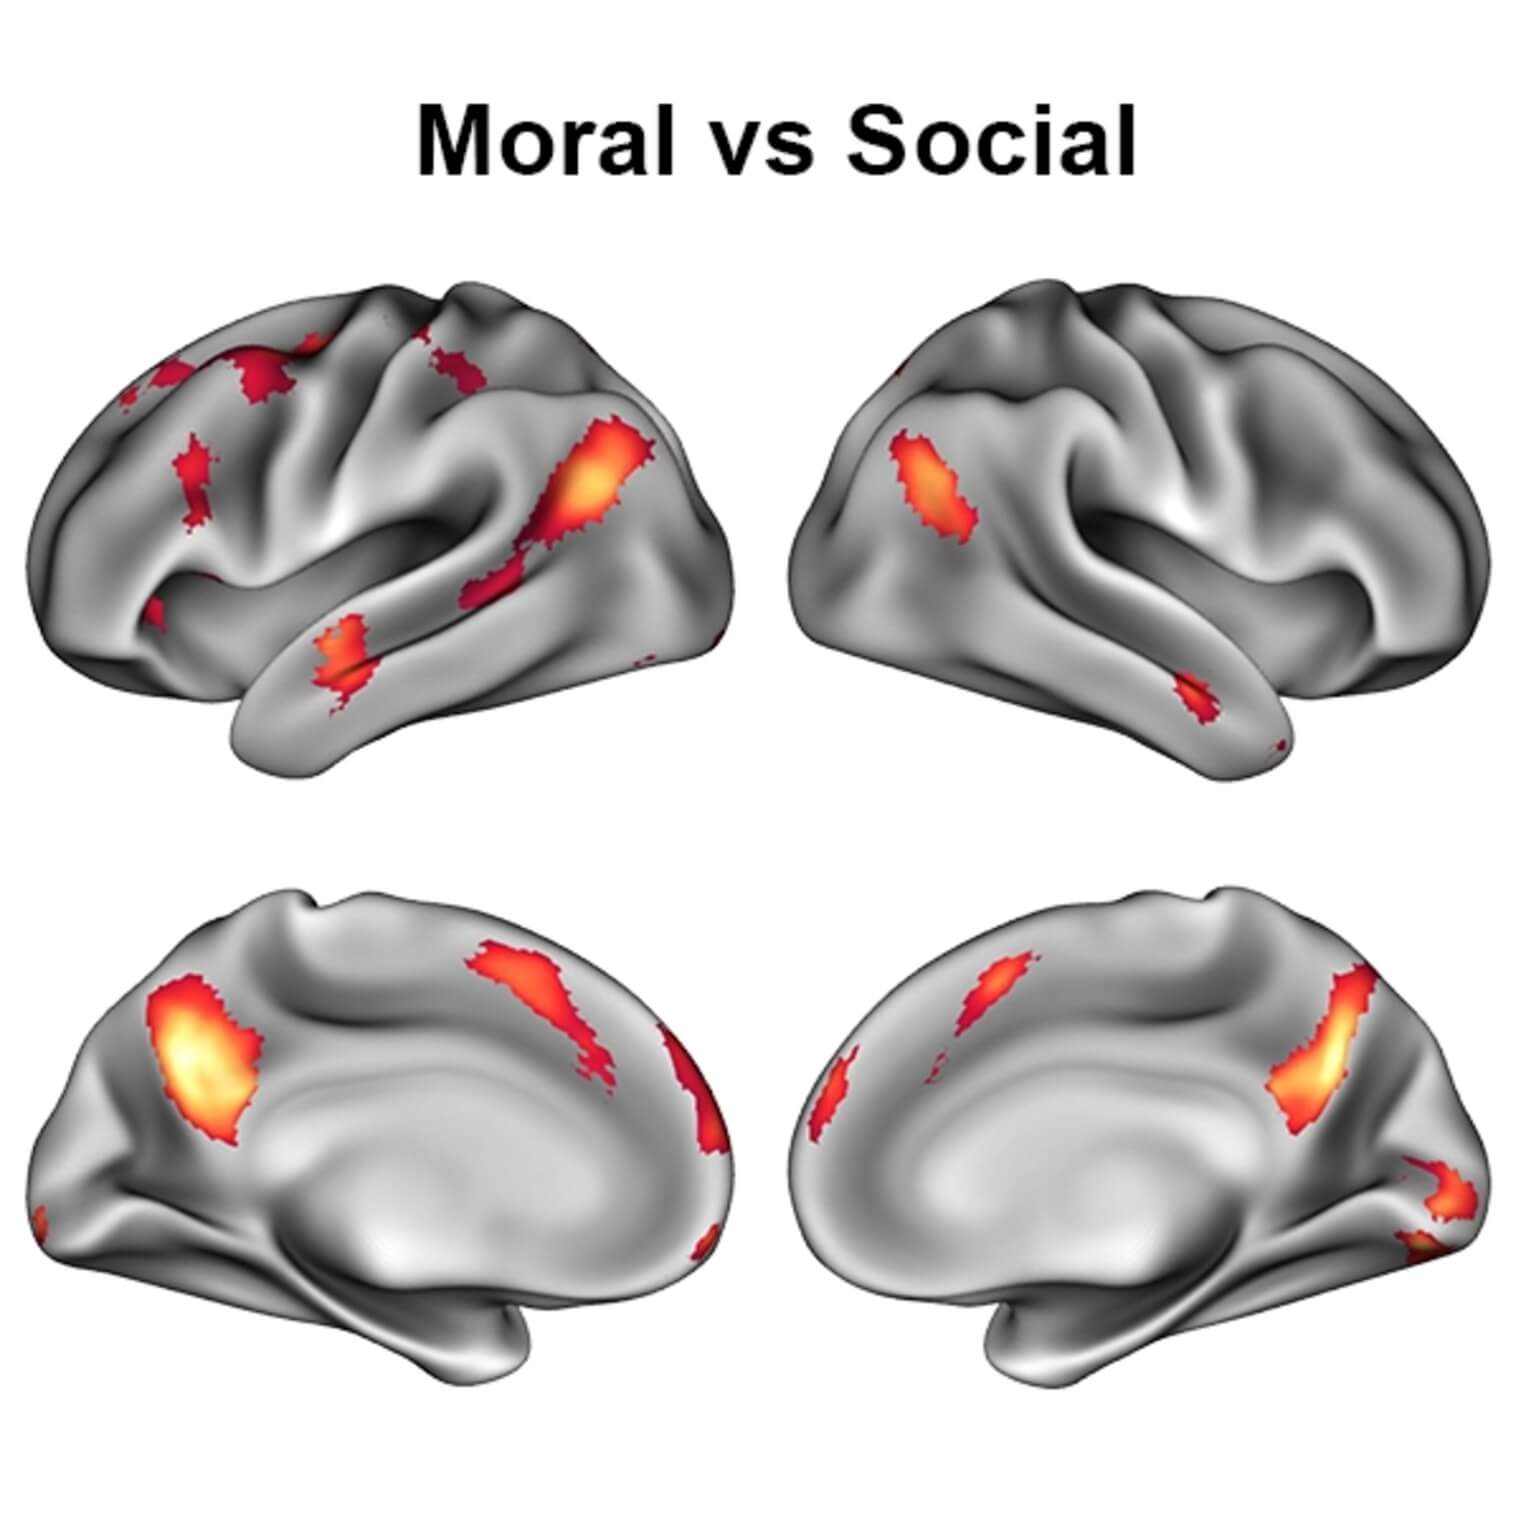 Making moral judgements activated different regions of the brain than merely evaluating social norms.